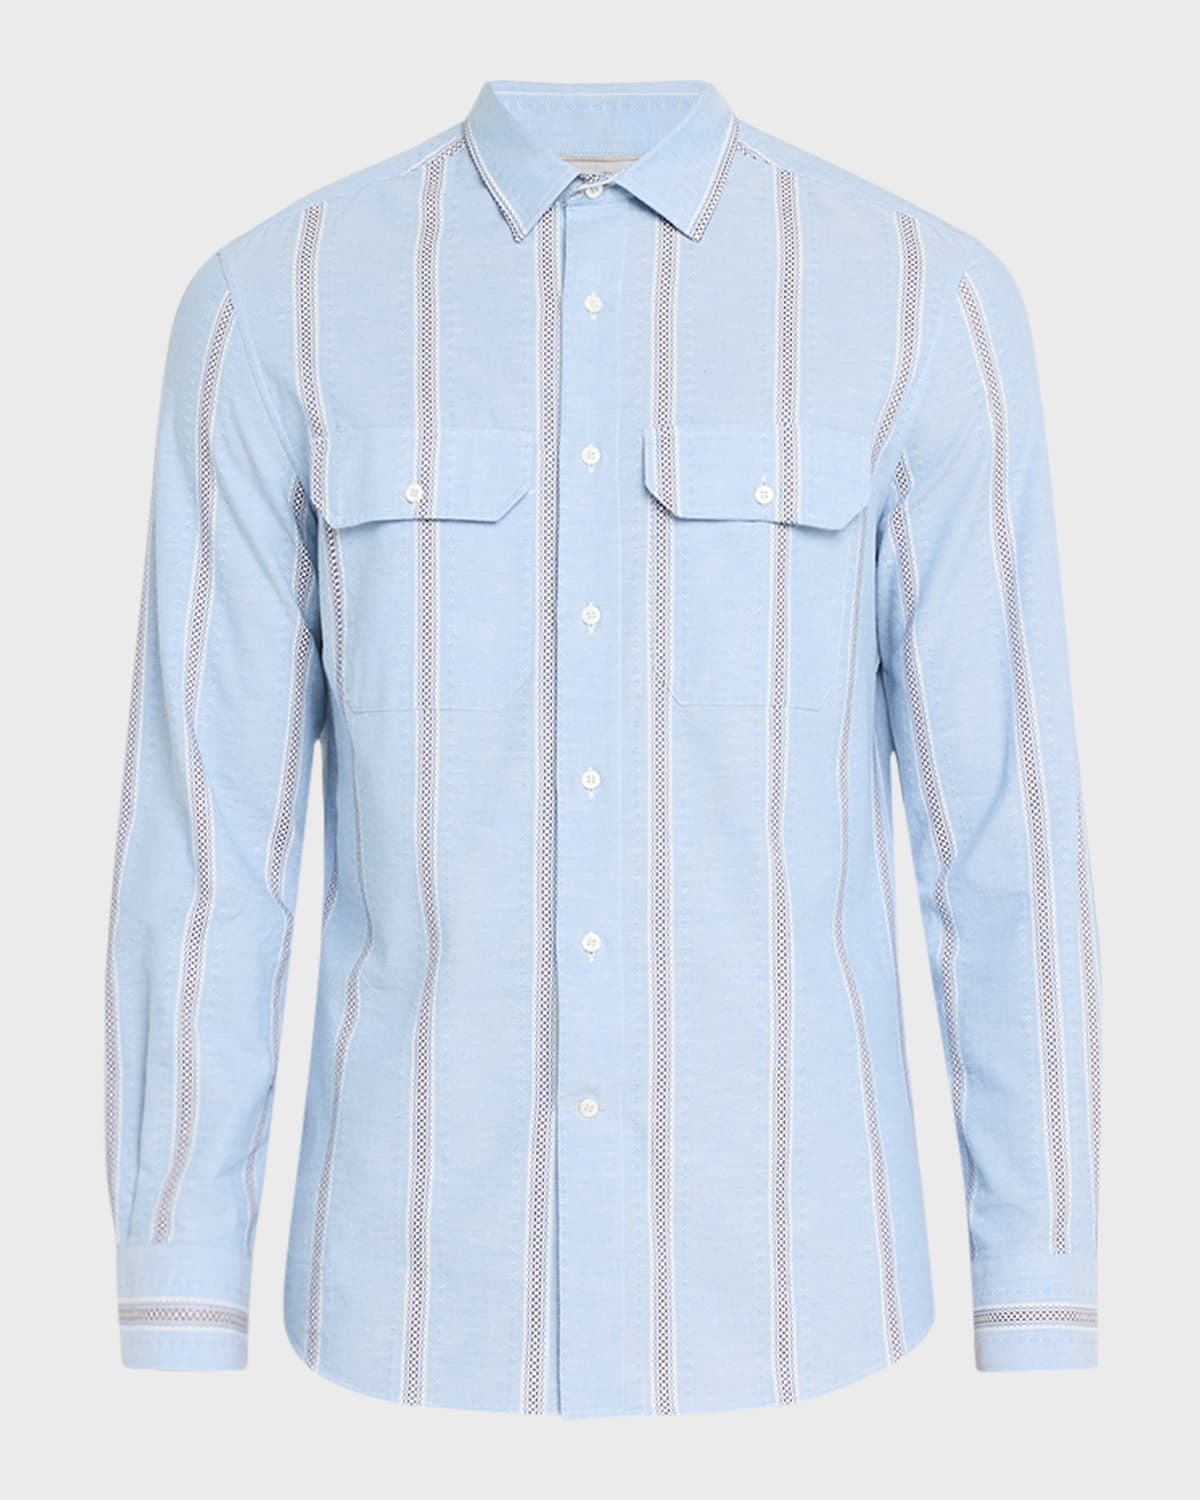 Men's Stripe Casual Button-Down Shirt with Pockets - 1